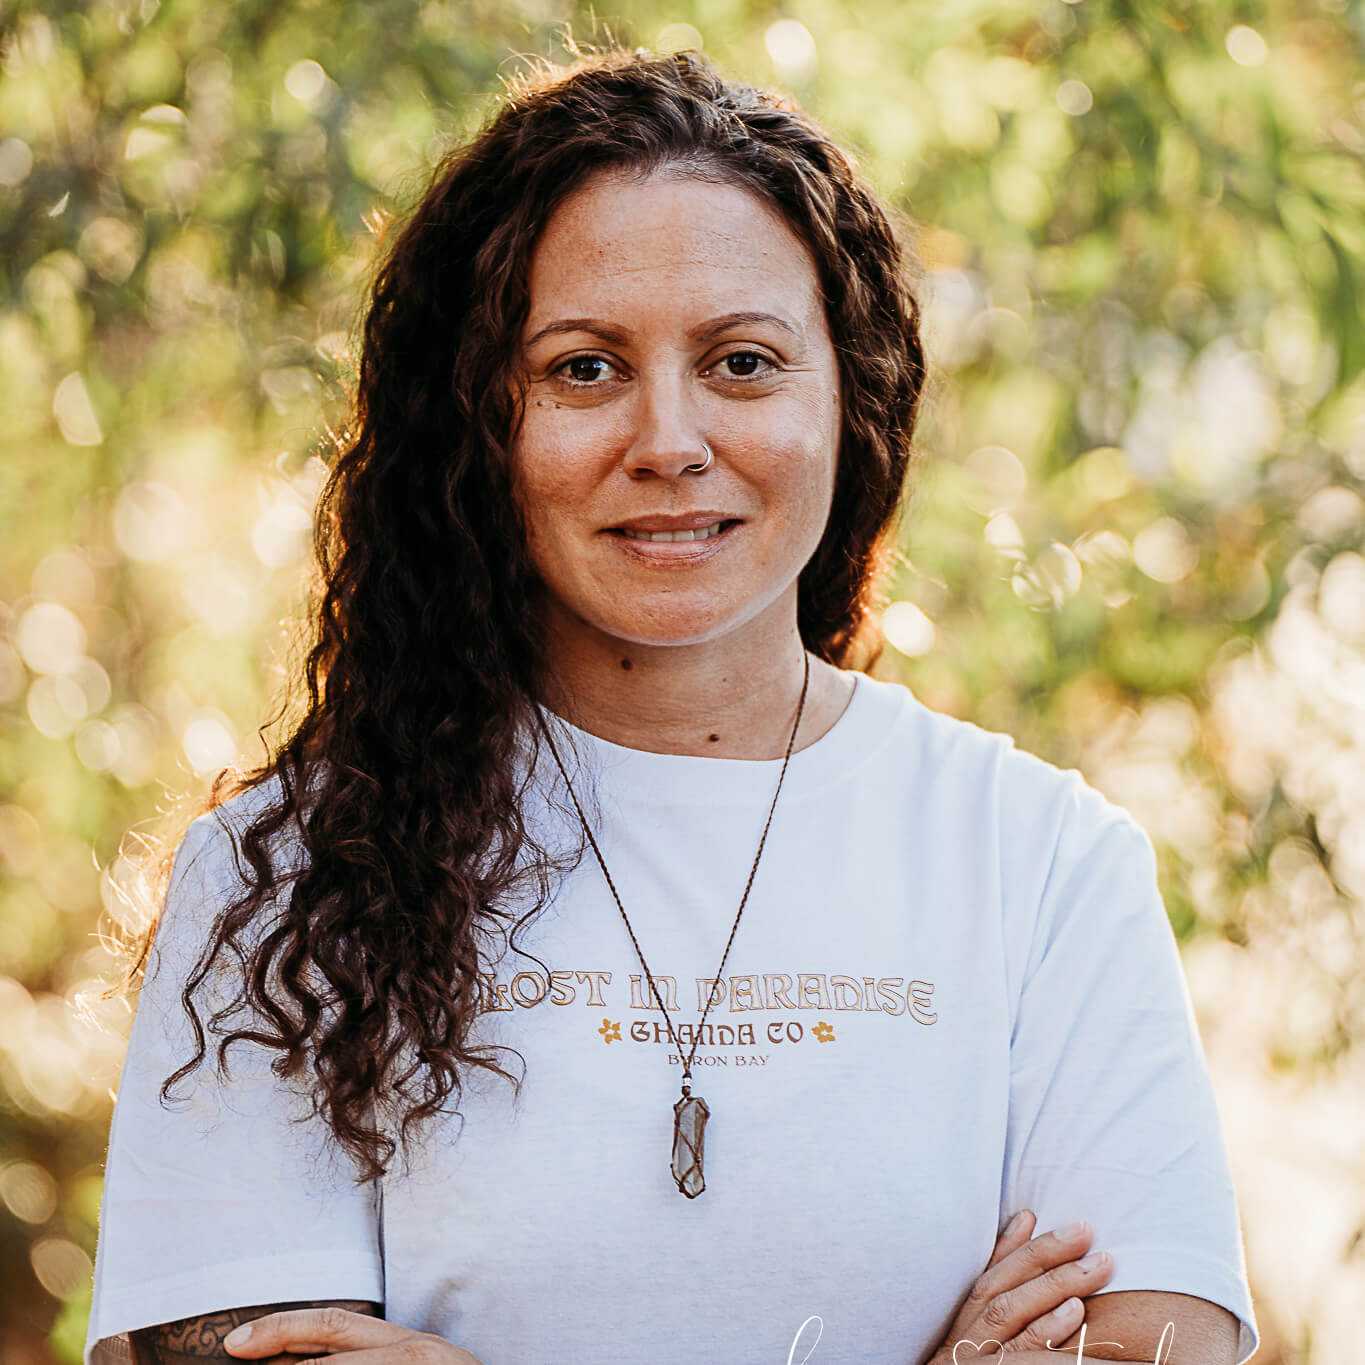 Indigenous artist and Gubbi Gubbi-based woman Chloe Watego smiles for the camera. She has long brown hair and is wearing a white t-shirt.